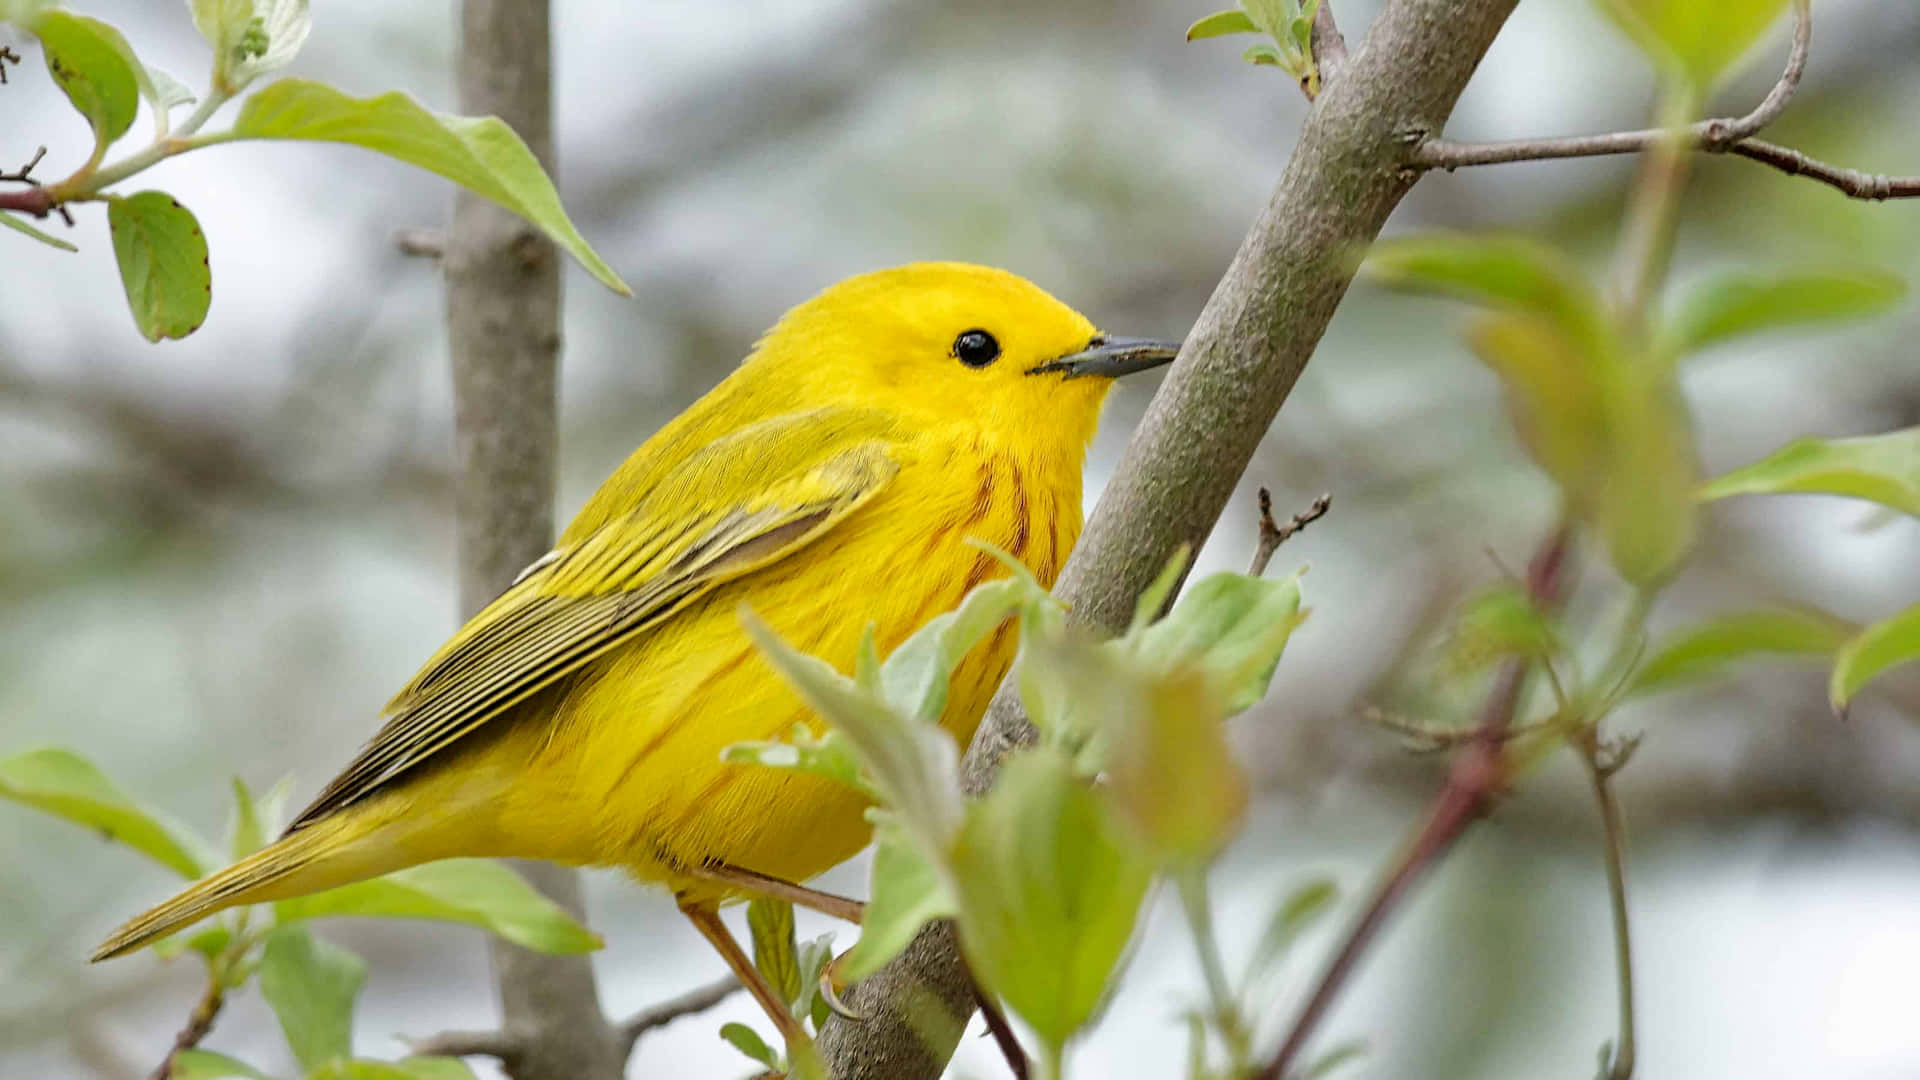 Vibrant Yellow Warbler perched on a branch. Wallpaper